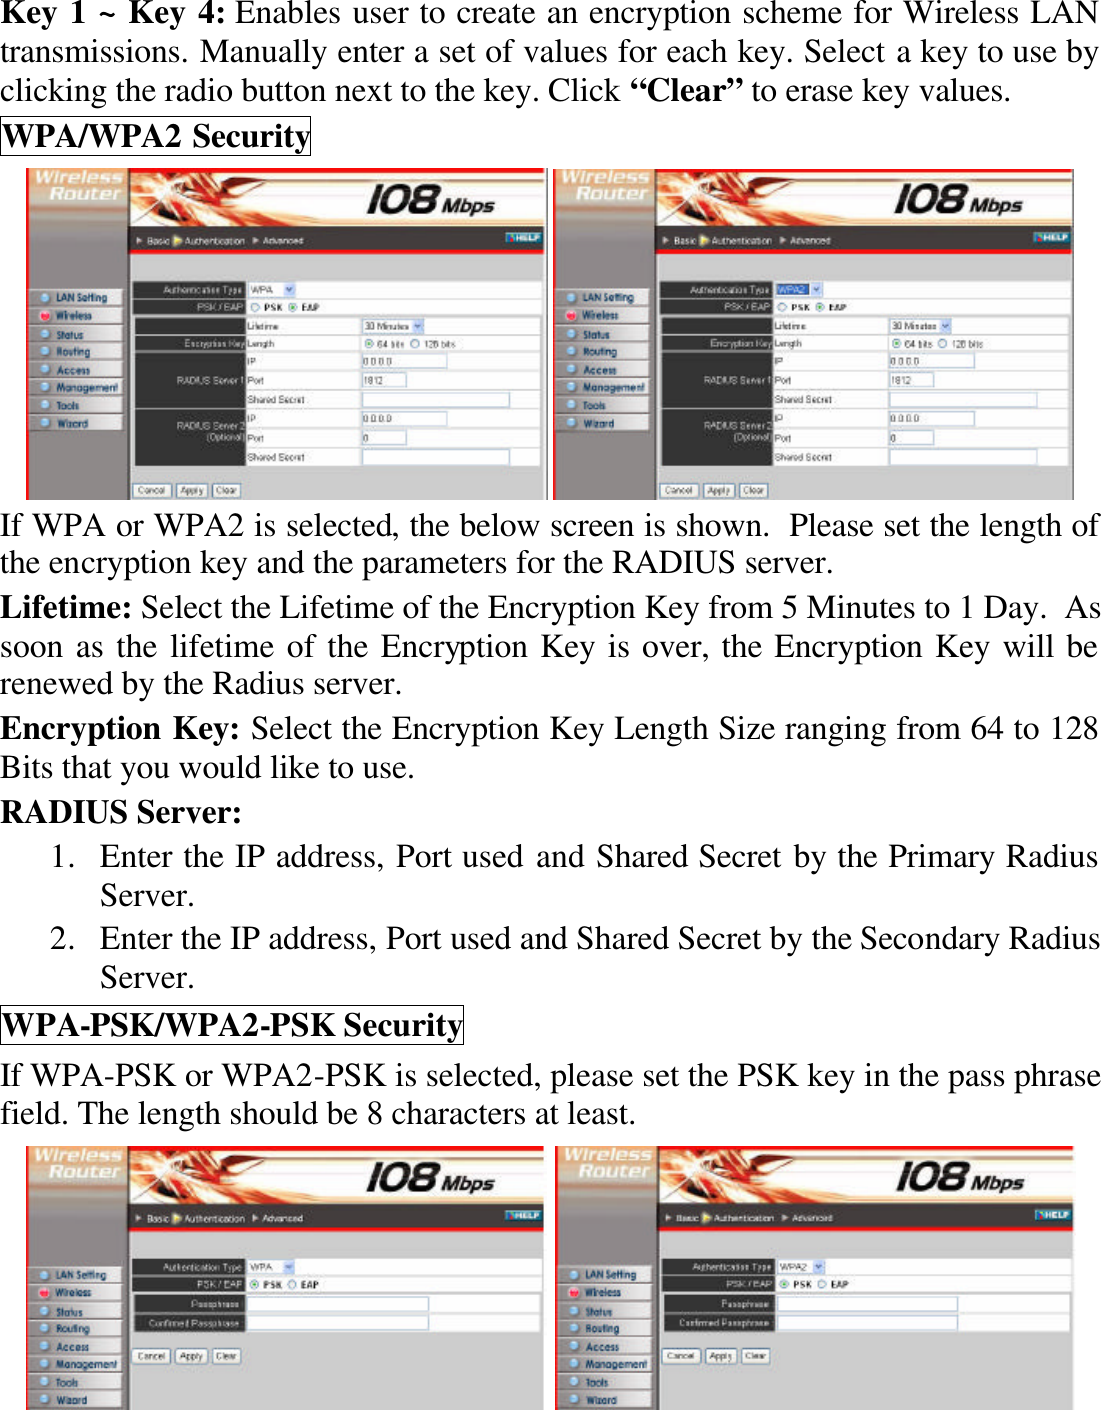 Key 1 ~ Key 4: Enables user to create an encryption scheme for Wireless LAN transmissions. Manually enter a set of values for each key. Select a key to use by clicking the radio button next to the key. Click “Clear” to erase key values. WPA/WPA2 Security    If WPA or WPA2 is selected, the below screen is shown.  Please set the length of the encryption key and the parameters for the RADIUS server. Lifetime: Select the Lifetime of the Encryption Key from 5 Minutes to 1 Day.  As soon as the lifetime of the Encryption Key is over, the Encryption Key will be renewed by the Radius server. Encryption Key: Select the Encryption Key Length Size ranging from 64 to 128 Bits that you would like to use. RADIUS Server:  1. Enter the IP address, Port used and Shared Secret by the Primary Radius Server. 2. Enter the IP address, Port used and Shared Secret by the Secondary Radius Server. WPA-PSK/WPA2-PSK Security If WPA-PSK or WPA2-PSK is selected, please set the PSK key in the pass phrase field. The length should be 8 characters at least.    